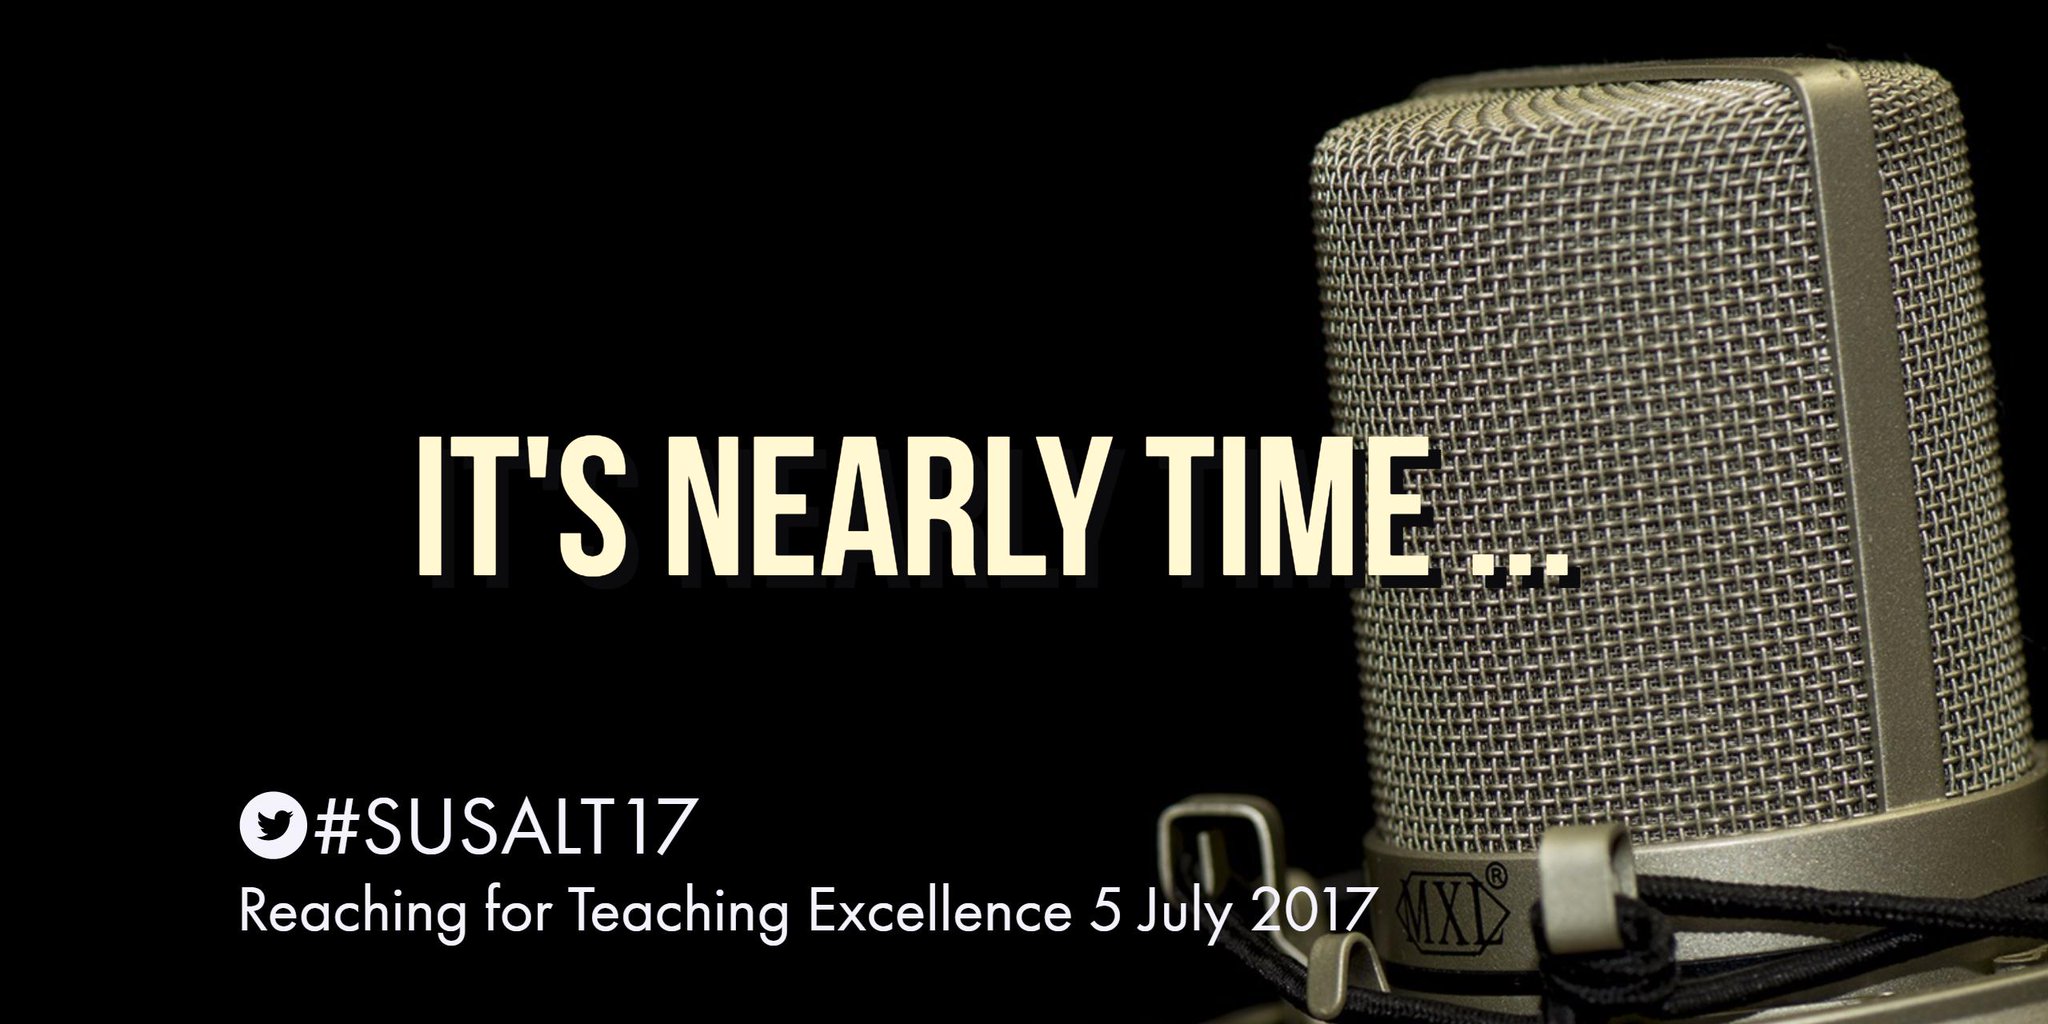 We are really looking forward to the SALT Conference on Wednesday 5/7/17 #susalt17 We have a great keynote lined up and some fab sessions .. https://t.co/P0XMhCSJNZ